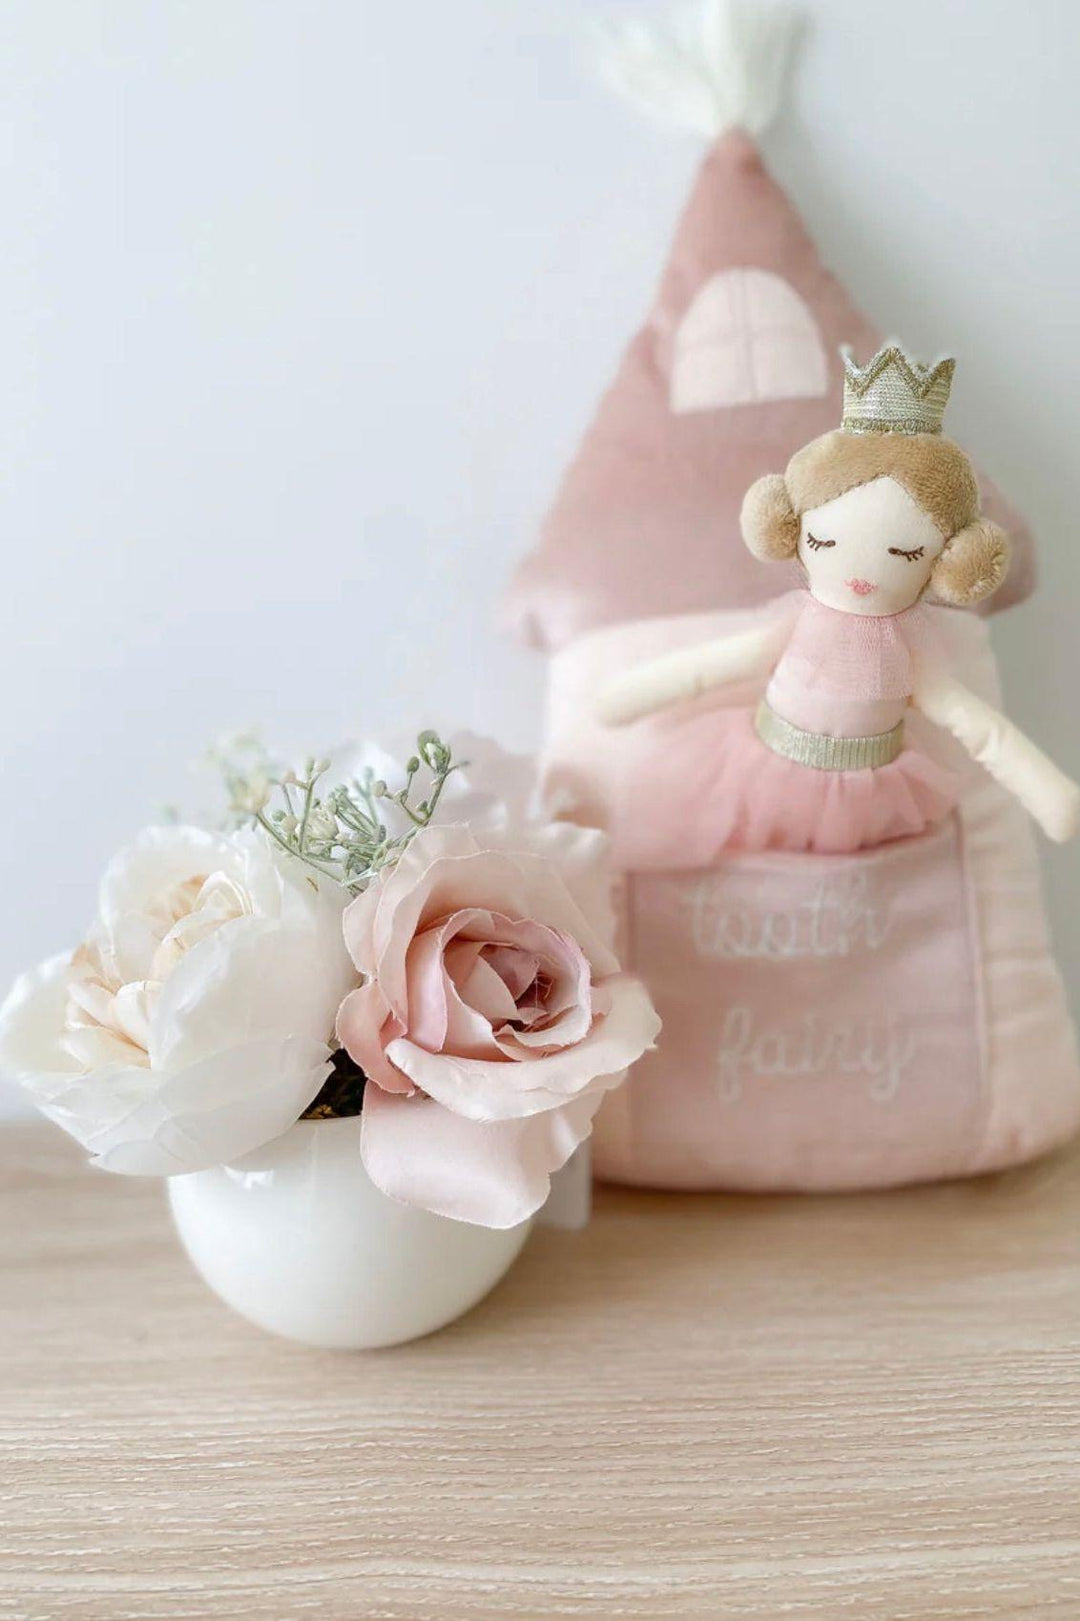 Princess and Her Castle Tooth Fairy Pillow - Enchanting Tooth Protector! - Sophia Rose Children's Boutique